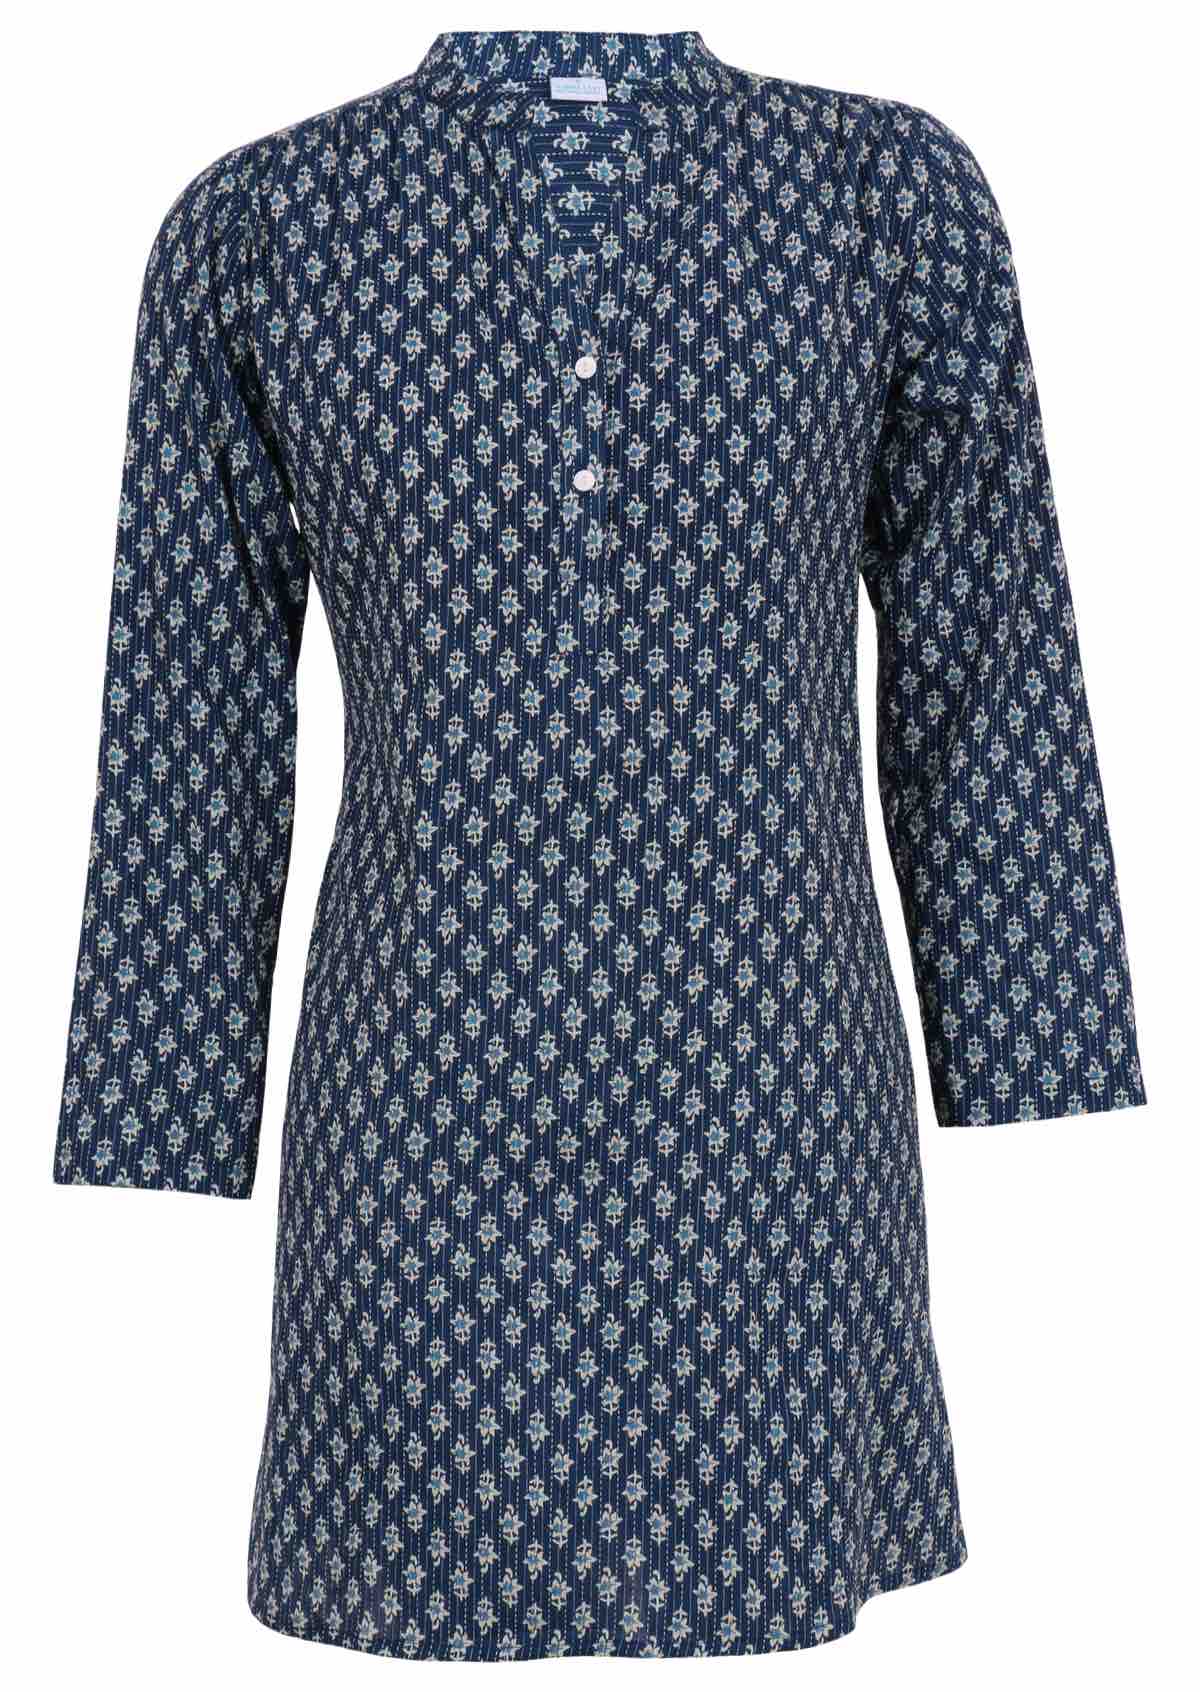 100% cotton tunic with blue florals and kantha stitches. 